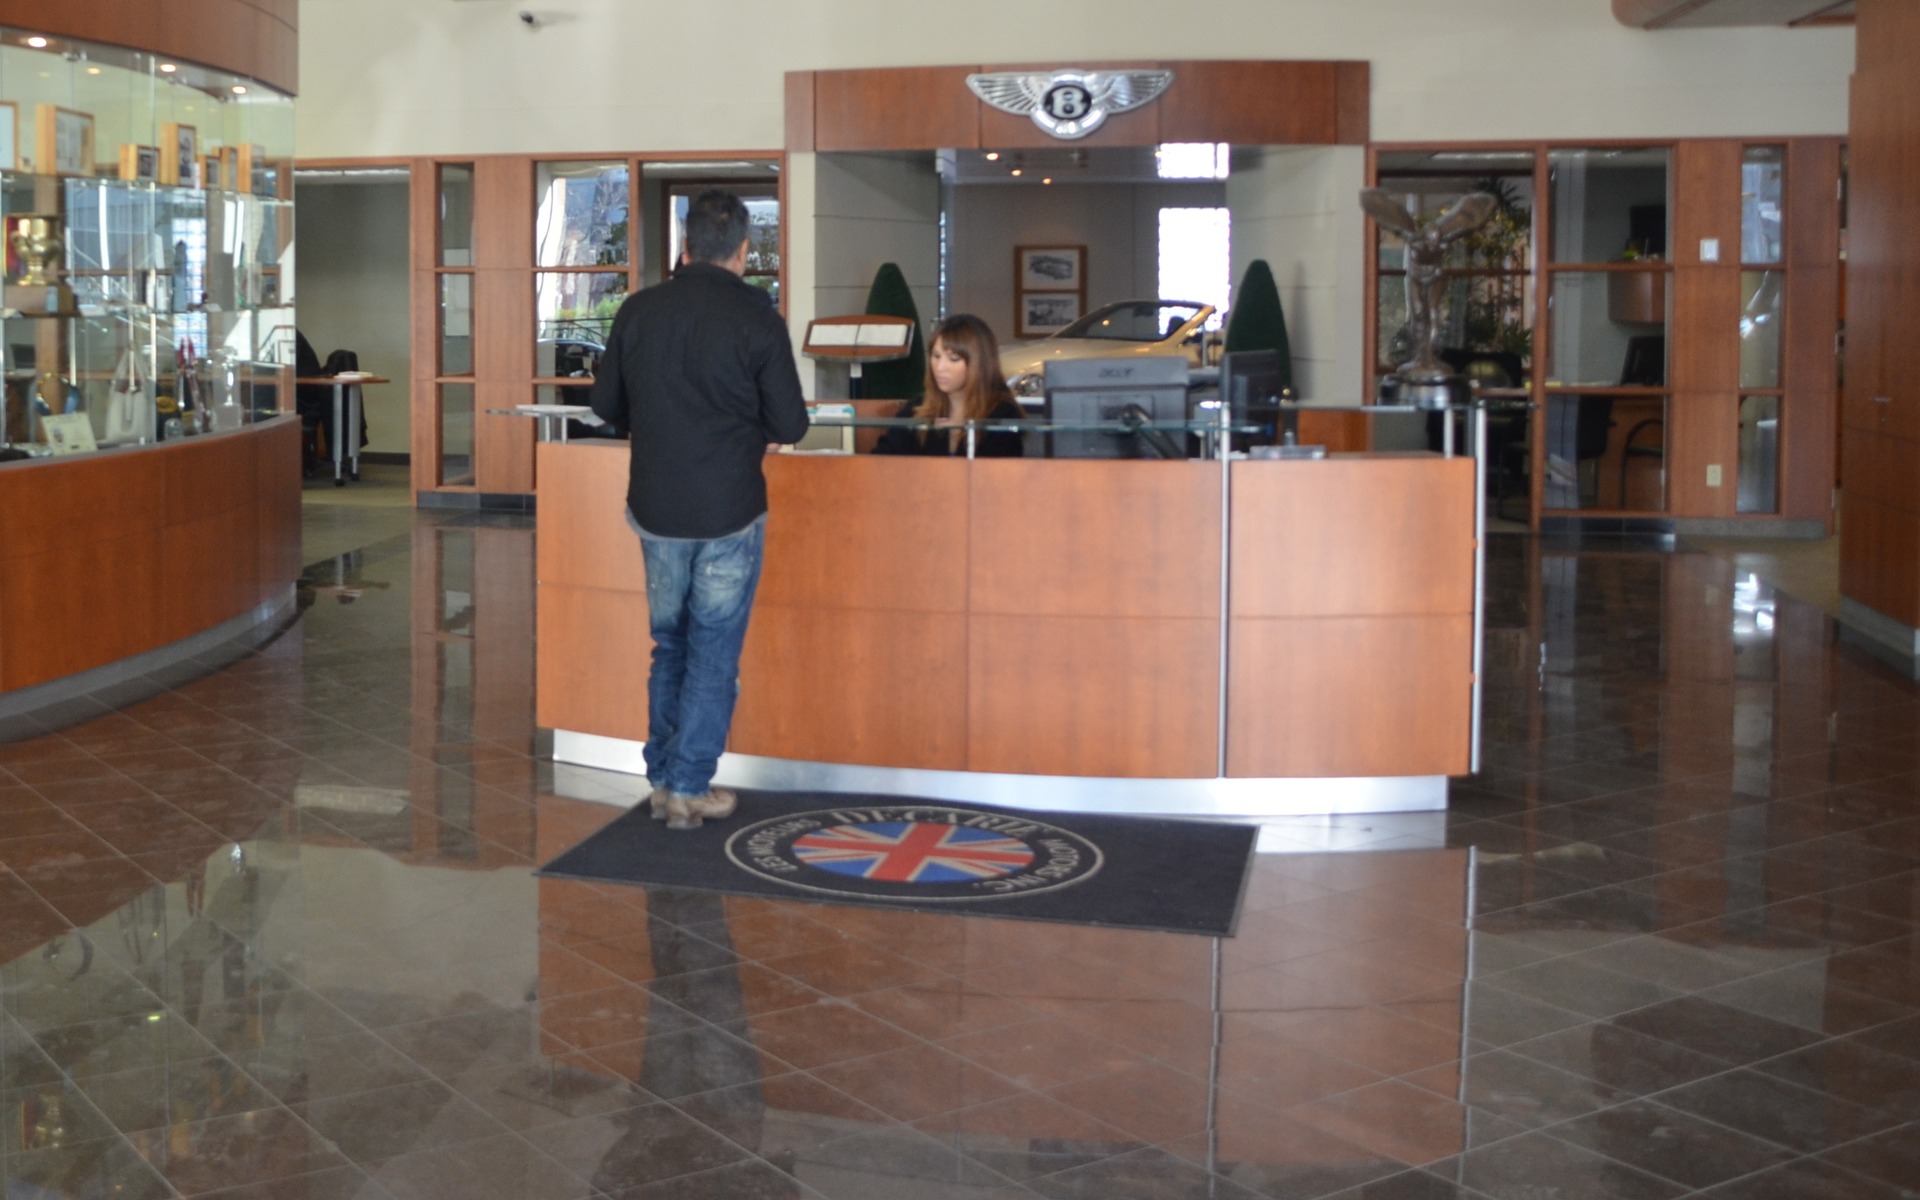 The lobby and reception desk.